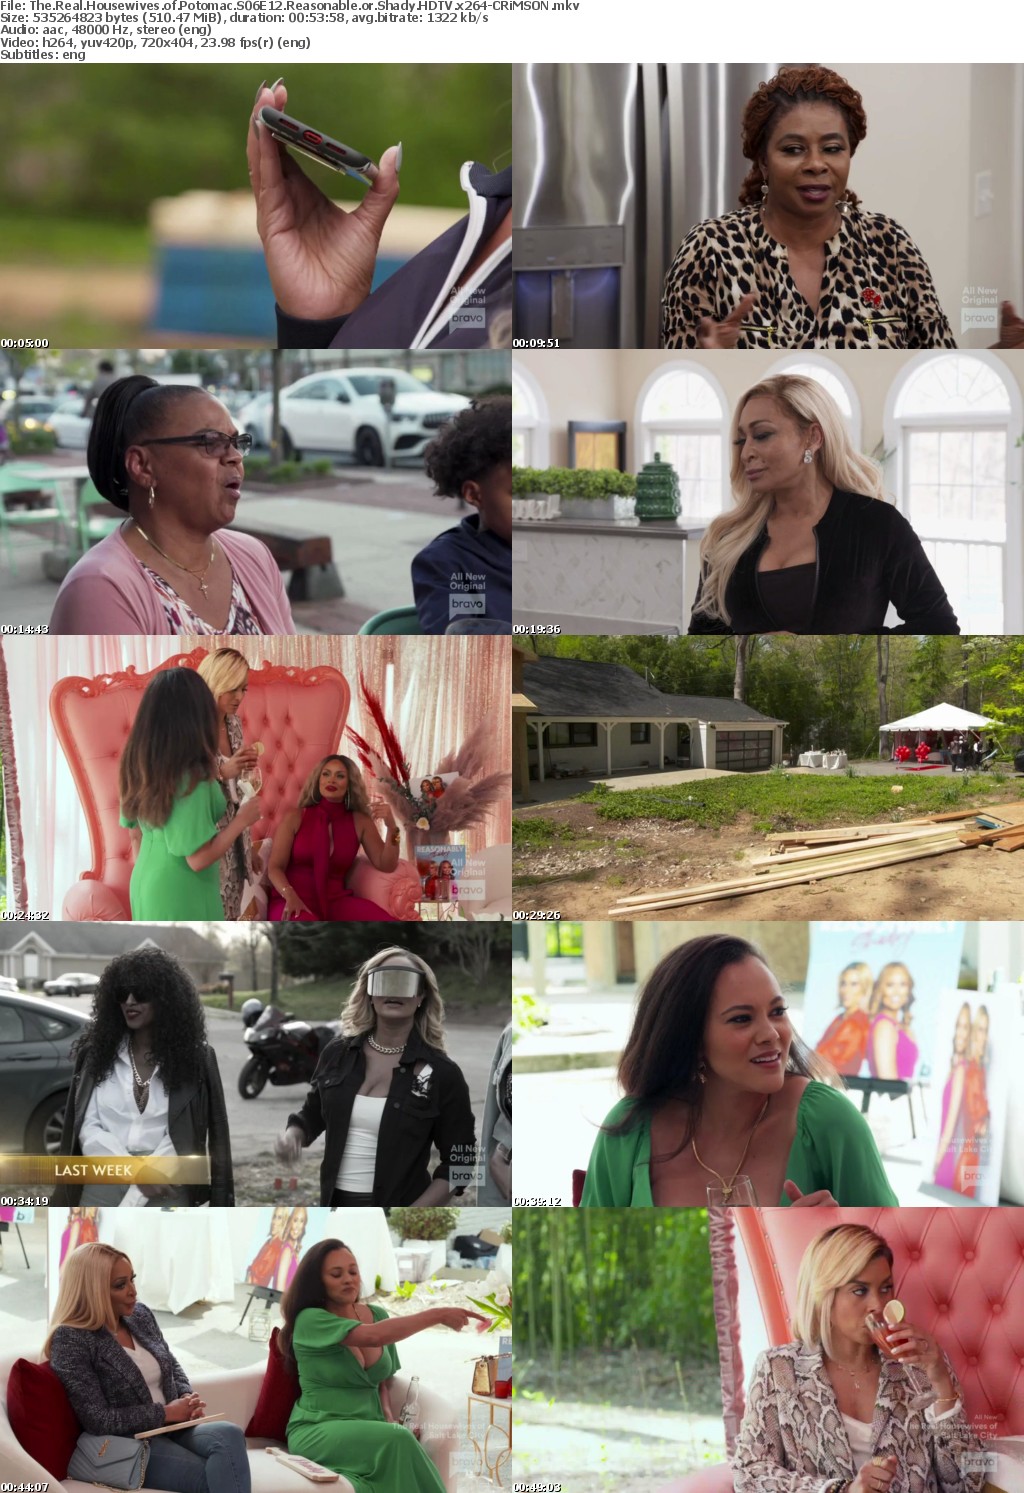 The Real Housewives of Potomac S06E12 Reasonable or Shady HDTV x264-CRiMSON